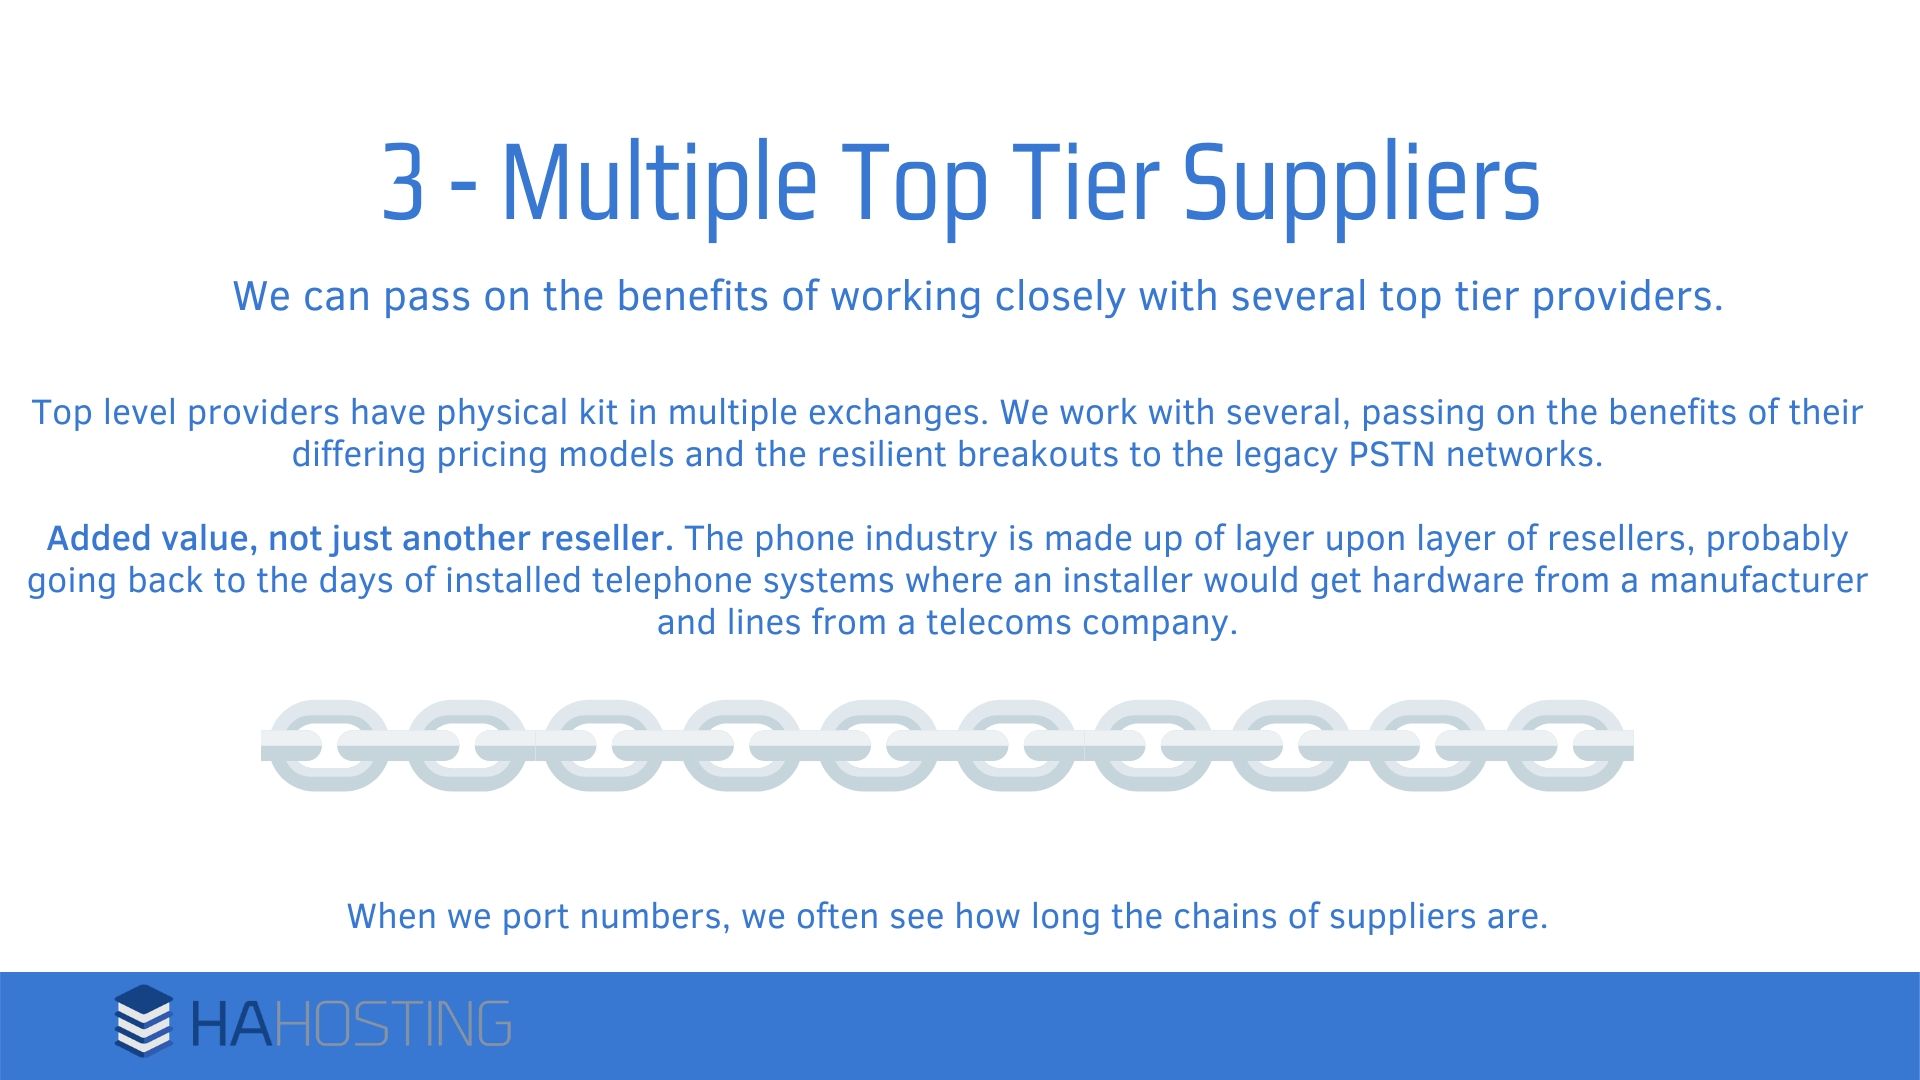 Multiple top tier suppliers - Top level providers have physical kit in multiple exchanges. We work with several, passing on the benefits of their differing pricing models and the resilient breakouts to the legacy PSTN networks. Added value, not just another reseller. The phone industry is made up of layer upon layer of resellers, probably going back to the days of installed telephone systems where an installer would get hardware from a manufacturer and lines from a telecoms company. When we port numbers, we often see how long the chains of suppliers are.